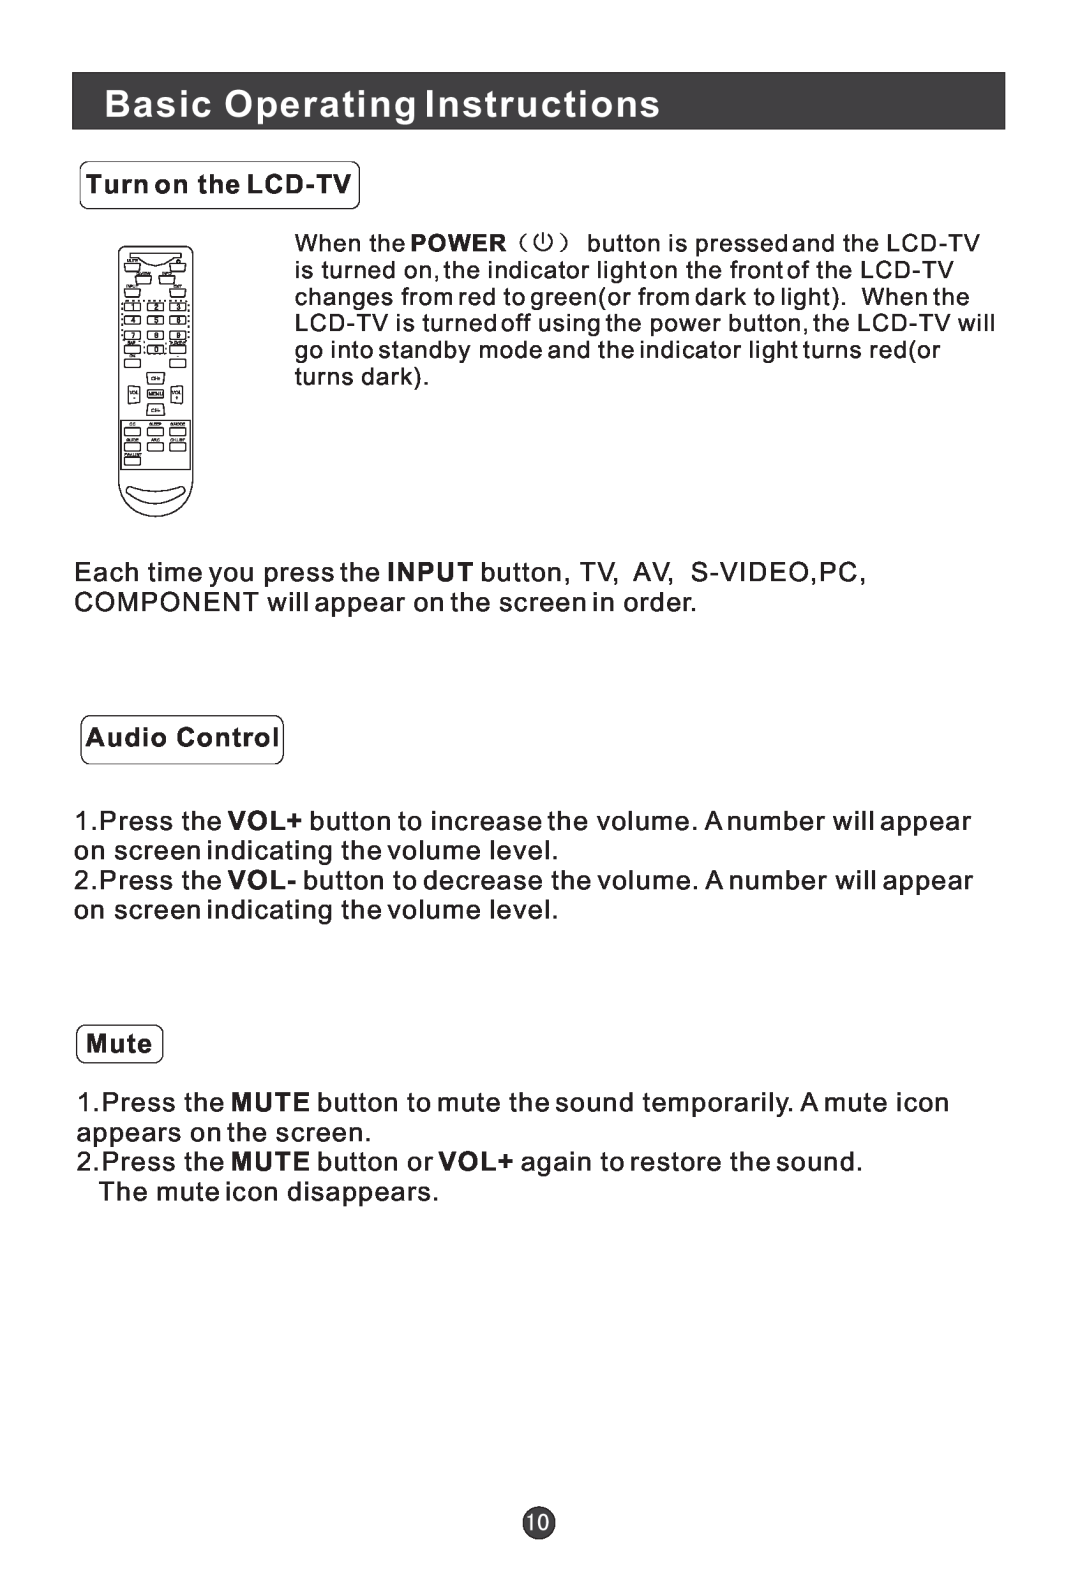 Haier HL15B user manual Basic Operating Instructions, Turn on the LCD-TV, Audio Control, Mute 